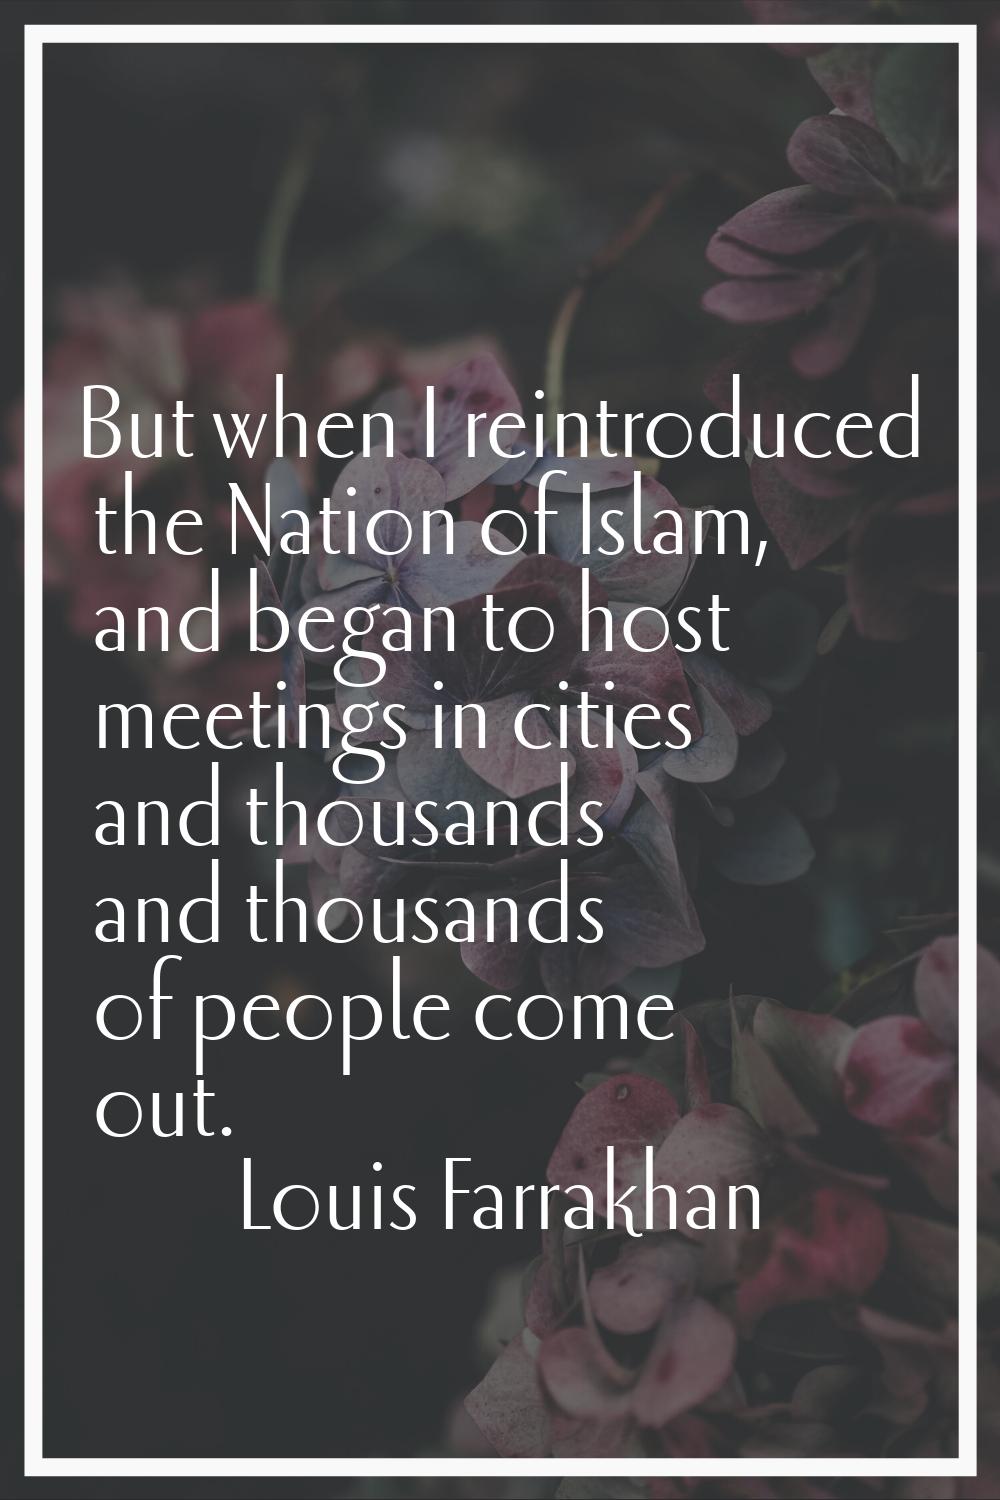 But when I reintroduced the Nation of Islam, and began to host meetings in cities and thousands and